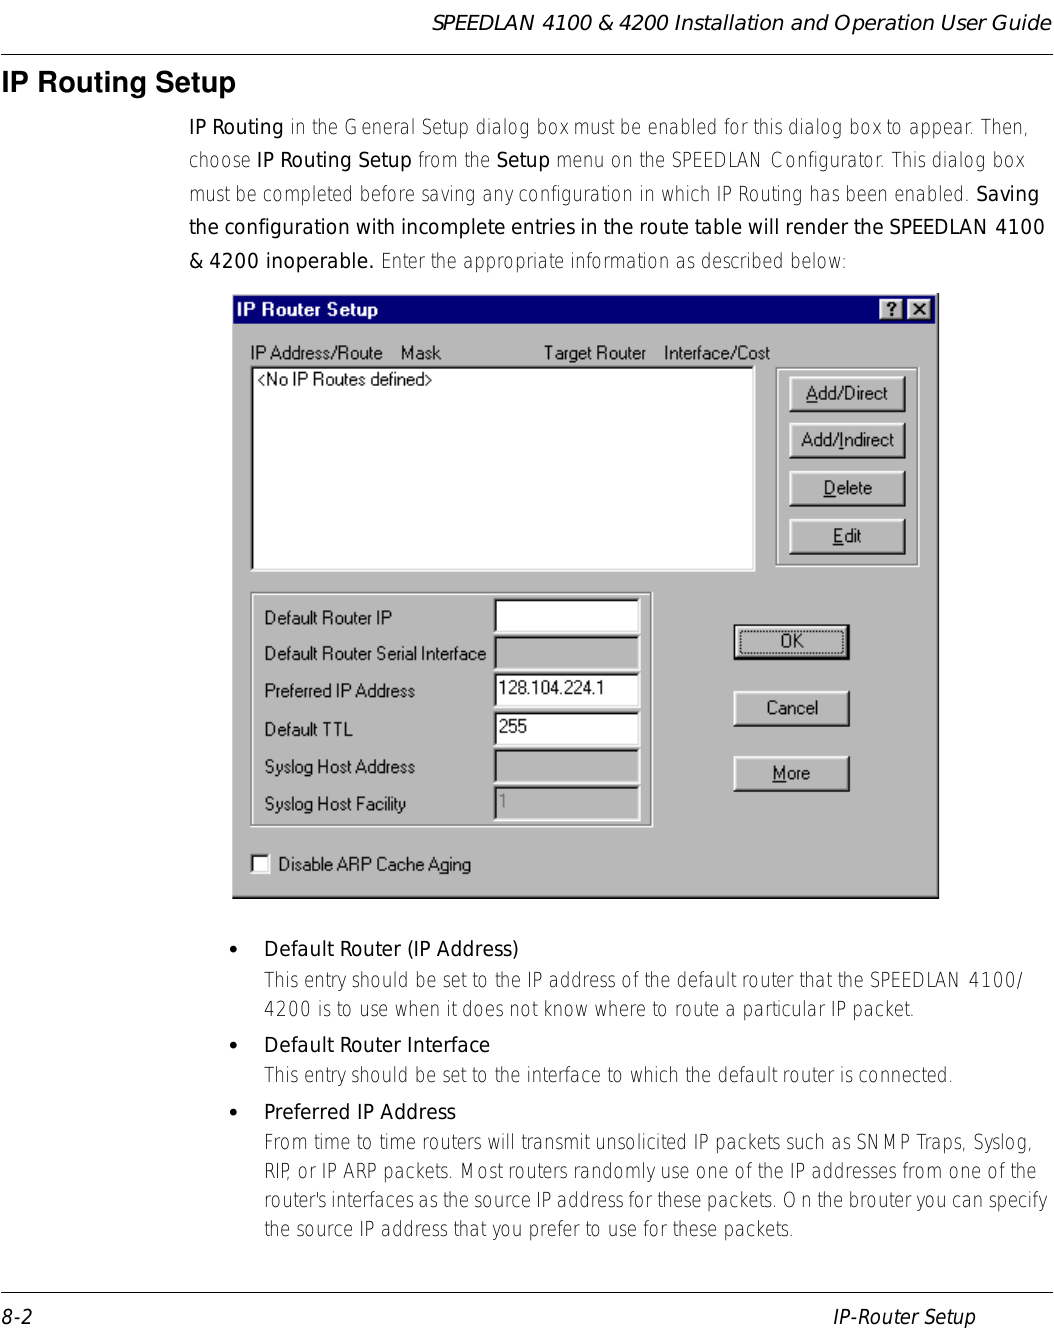 SPEEDLAN 4100 &amp; 4200 Installation and Operation User Guide 8-2 IP-Router SetupIP Routing SetupIP Routing in the General Setup dialog box must be enabled for this dialog box to appear. Then, choose IP Routing Setup from the Setup menu on the SPEEDLAN Configurator. This dialog box must be completed before saving any configuration in which IP Routing has been enabled. Saving the configuration with incomplete entries in the route table will render the SPEEDLAN 4100 &amp; 4200 inoperable. Enter the appropriate information as described below:•Default Router (IP Address)This entry should be set to the IP address of the default router that the SPEEDLAN 4100/4200 is to use when it does not know where to route a particular IP packet.  •Default Router InterfaceThis entry should be set to the interface to which the default router is connected.   •Preferred IP AddressFrom time to time routers will transmit unsolicited IP packets such as SNMP Traps, Syslog, RIP, or IP ARP packets. Most routers randomly use one of the IP addresses from one of the router&apos;s interfaces as the source IP address for these packets. On the brouter you can specify the source IP address that you prefer to use for these packets.               